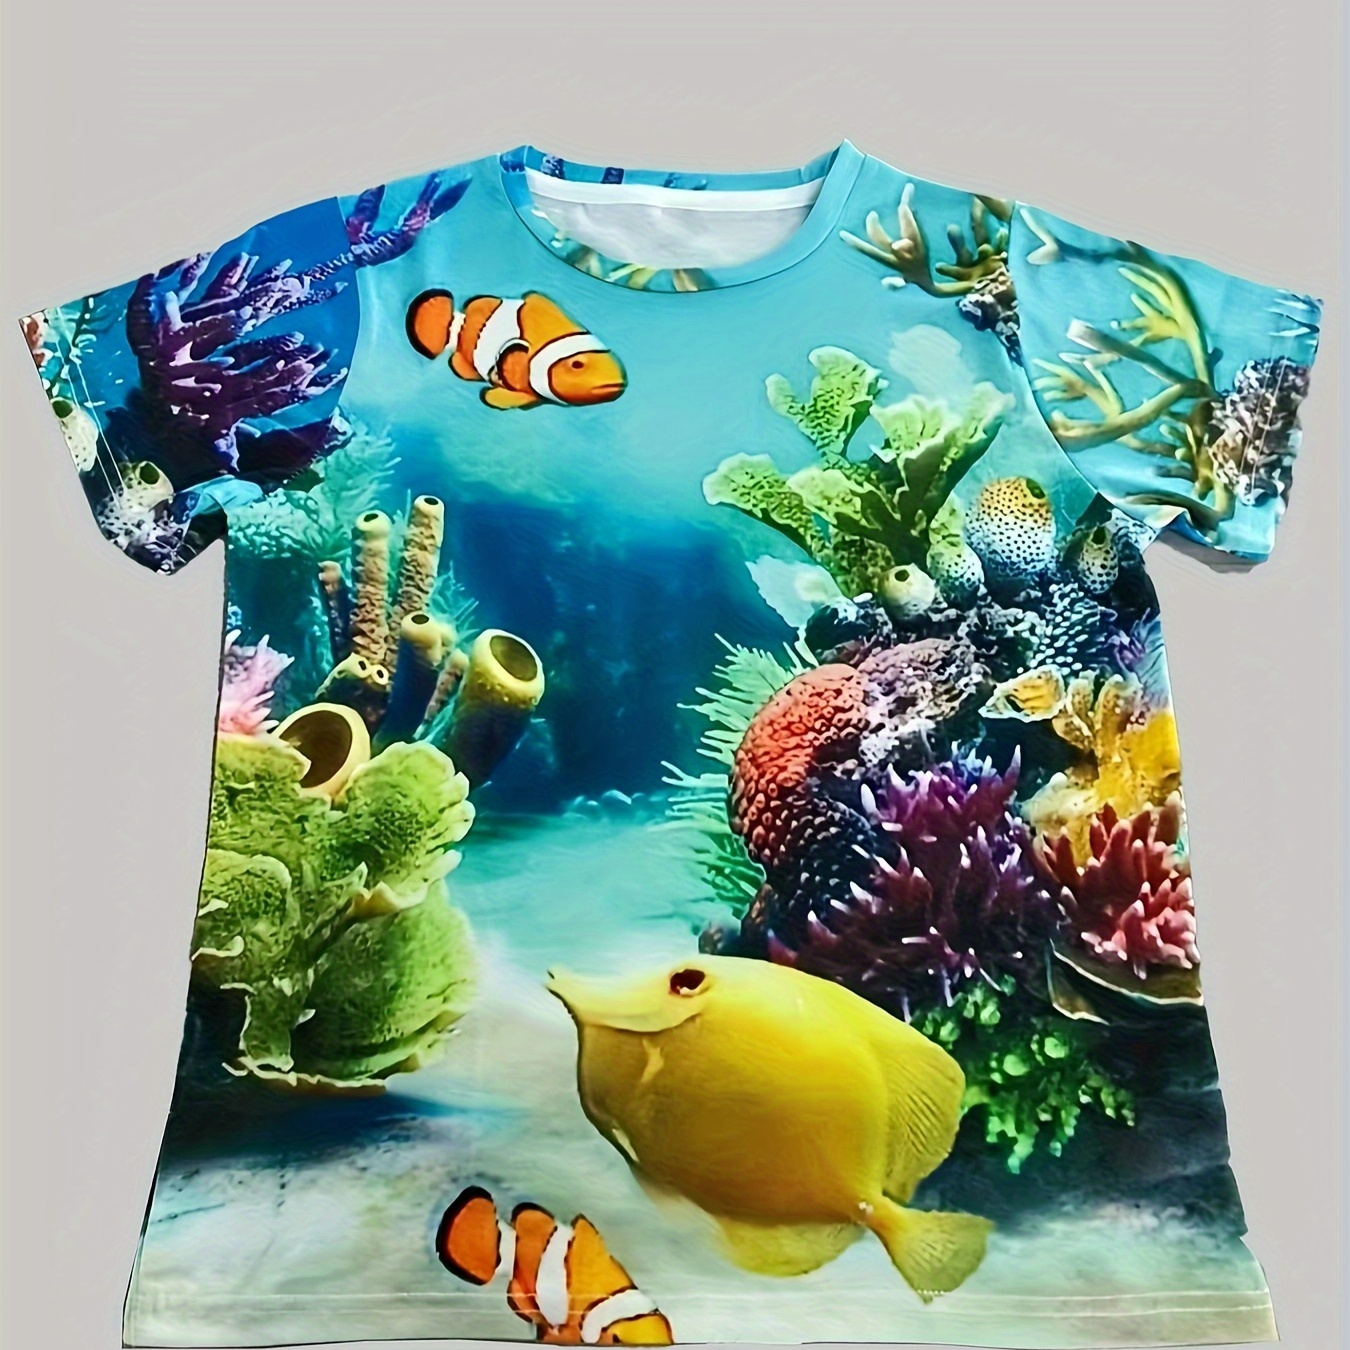 

Sea World Coral Reef And Fish 3d Print Boys Creative T-shirt, Casual Lightweight Comfy Short Sleeve Tee Tops, Kids Clothings For Summer